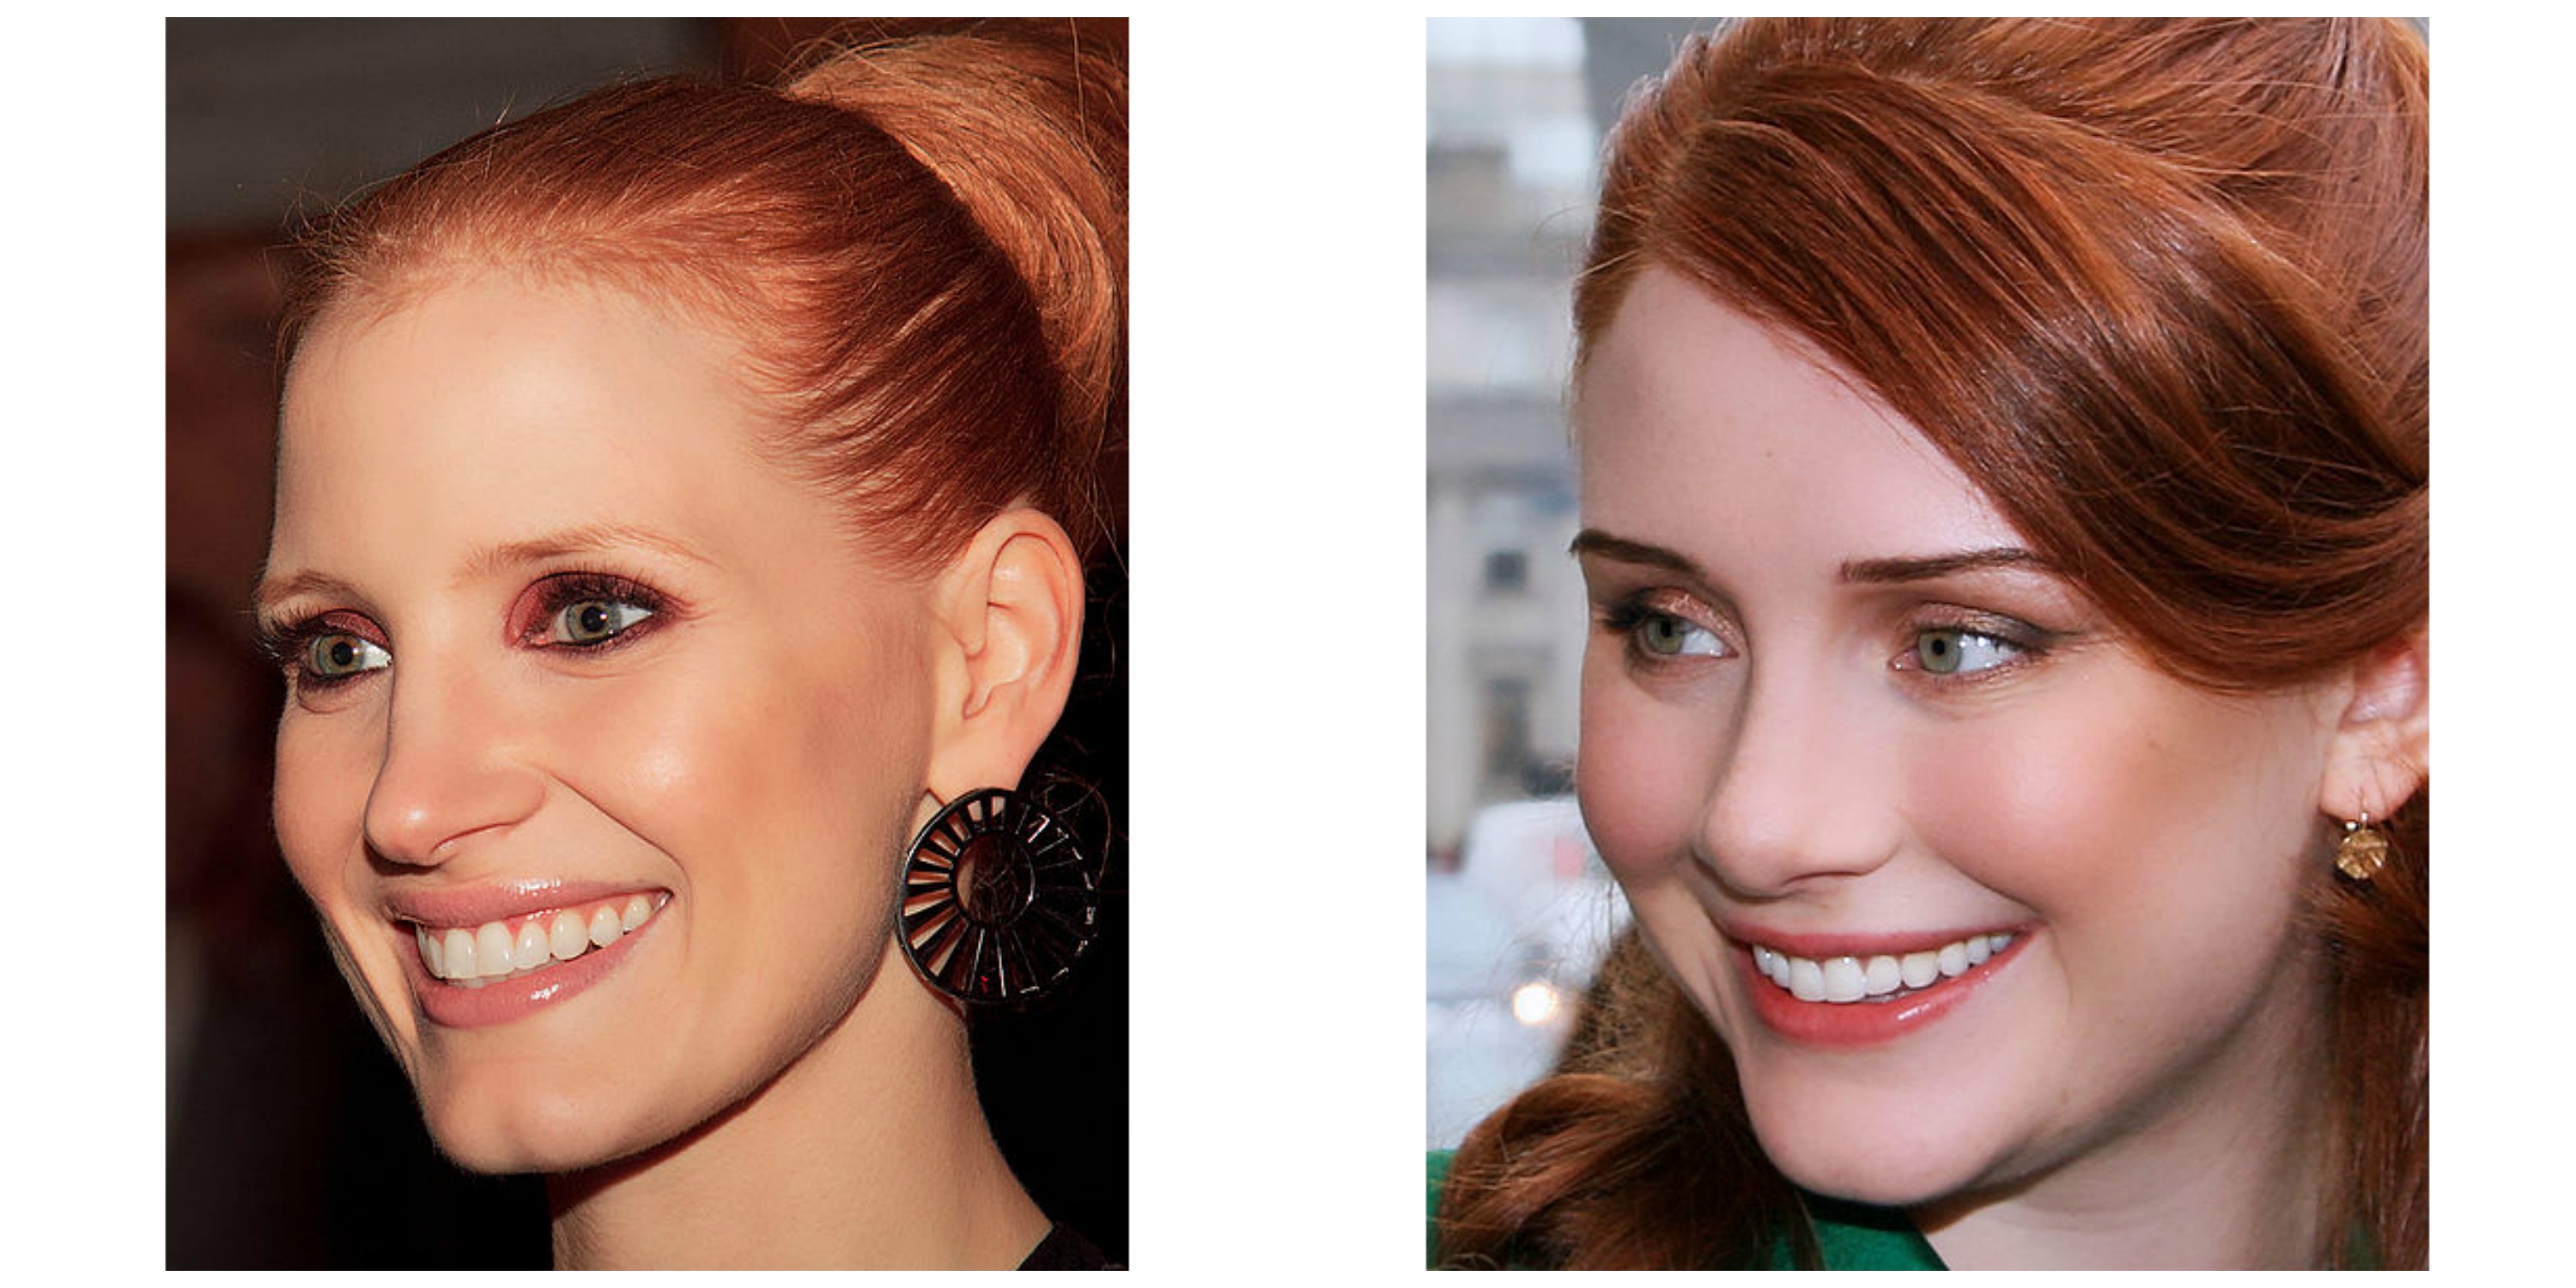 Is Jessica Chastain actually Ron Howard’s illegitimate daughter?